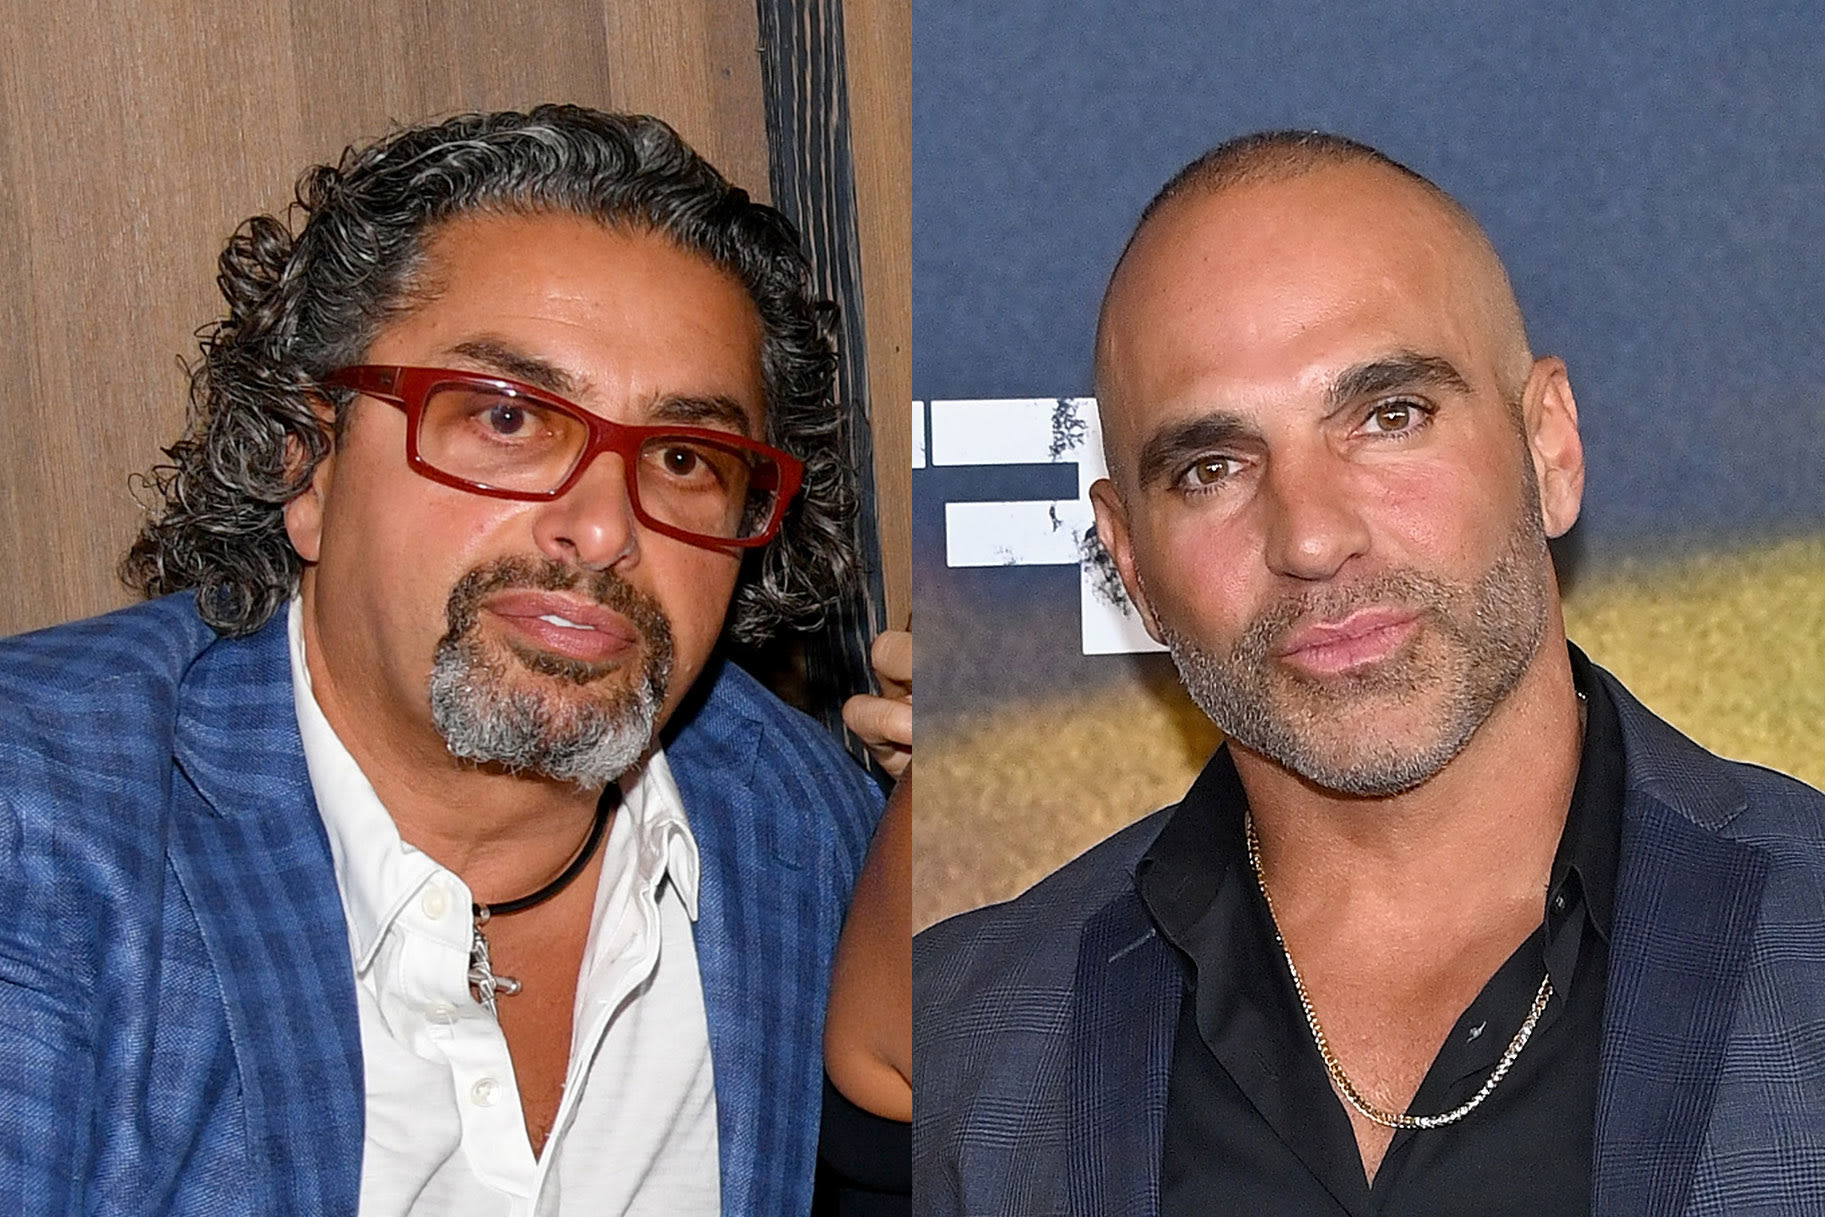 Joe Gorga Details "Nasty" Interaction with Kathy Wakile's Husband Rich | Bravo TV Official Site